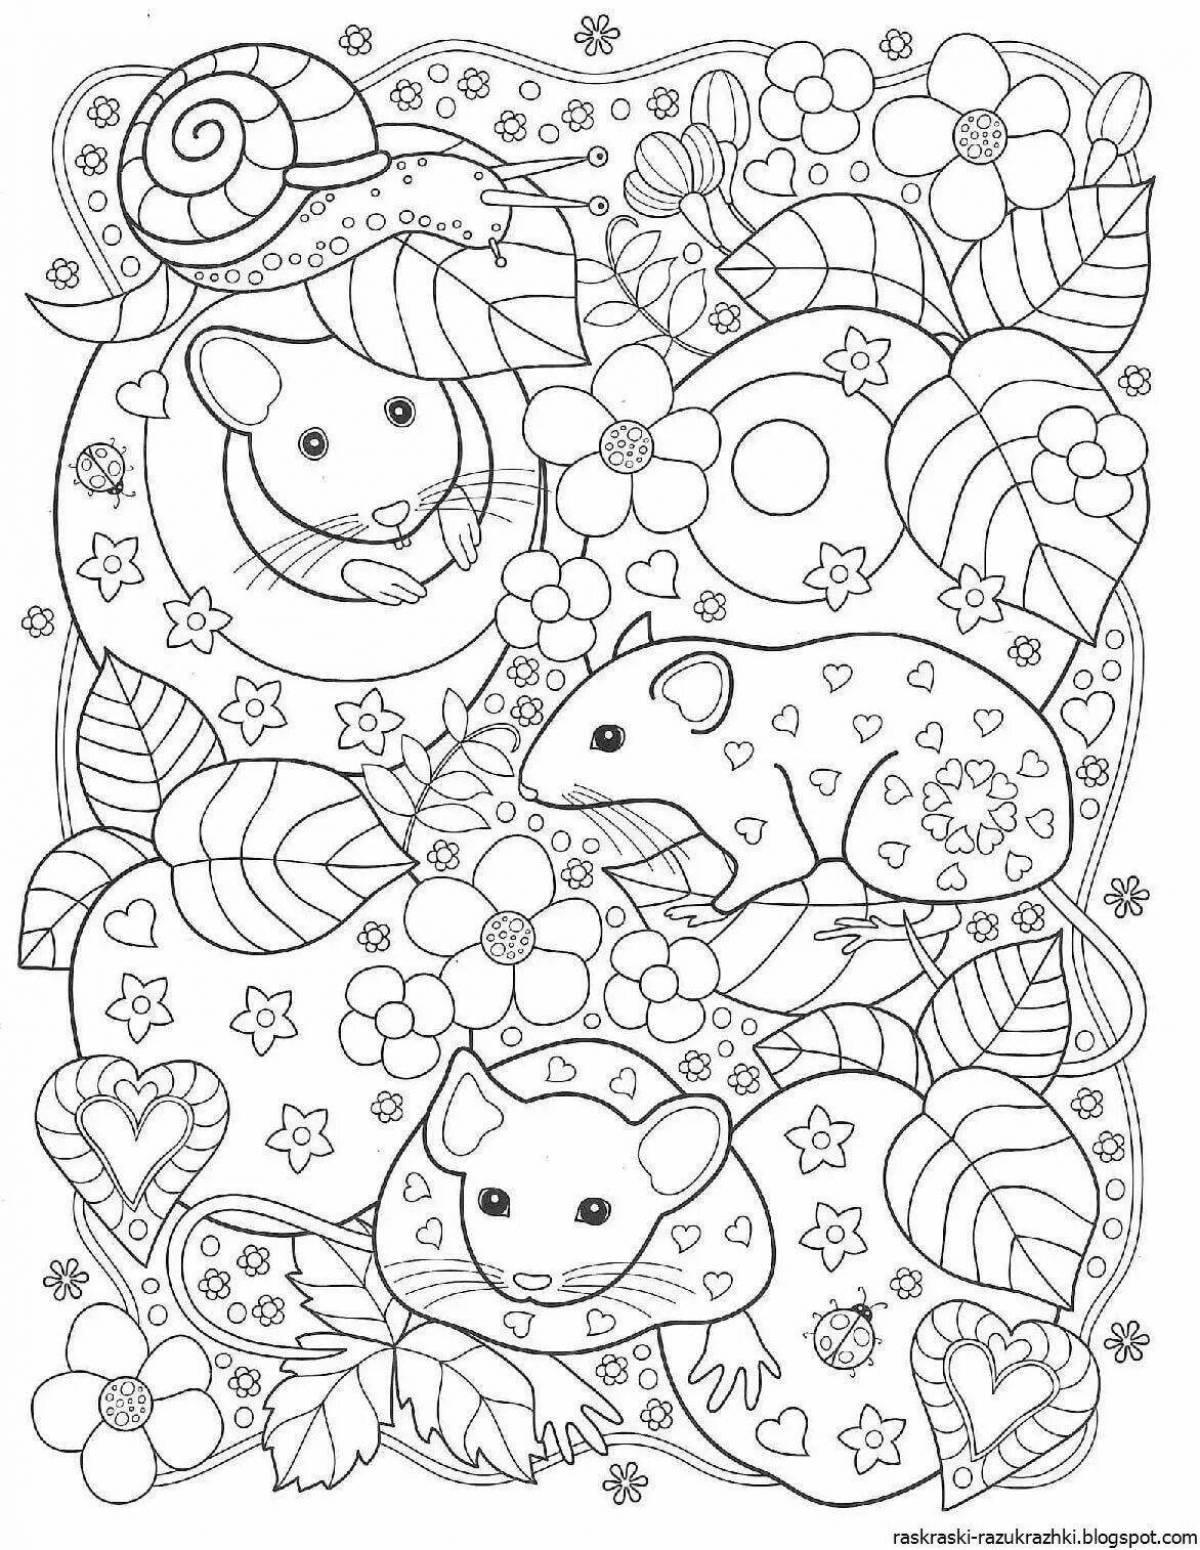 Touching anti-stress coloring book for kids